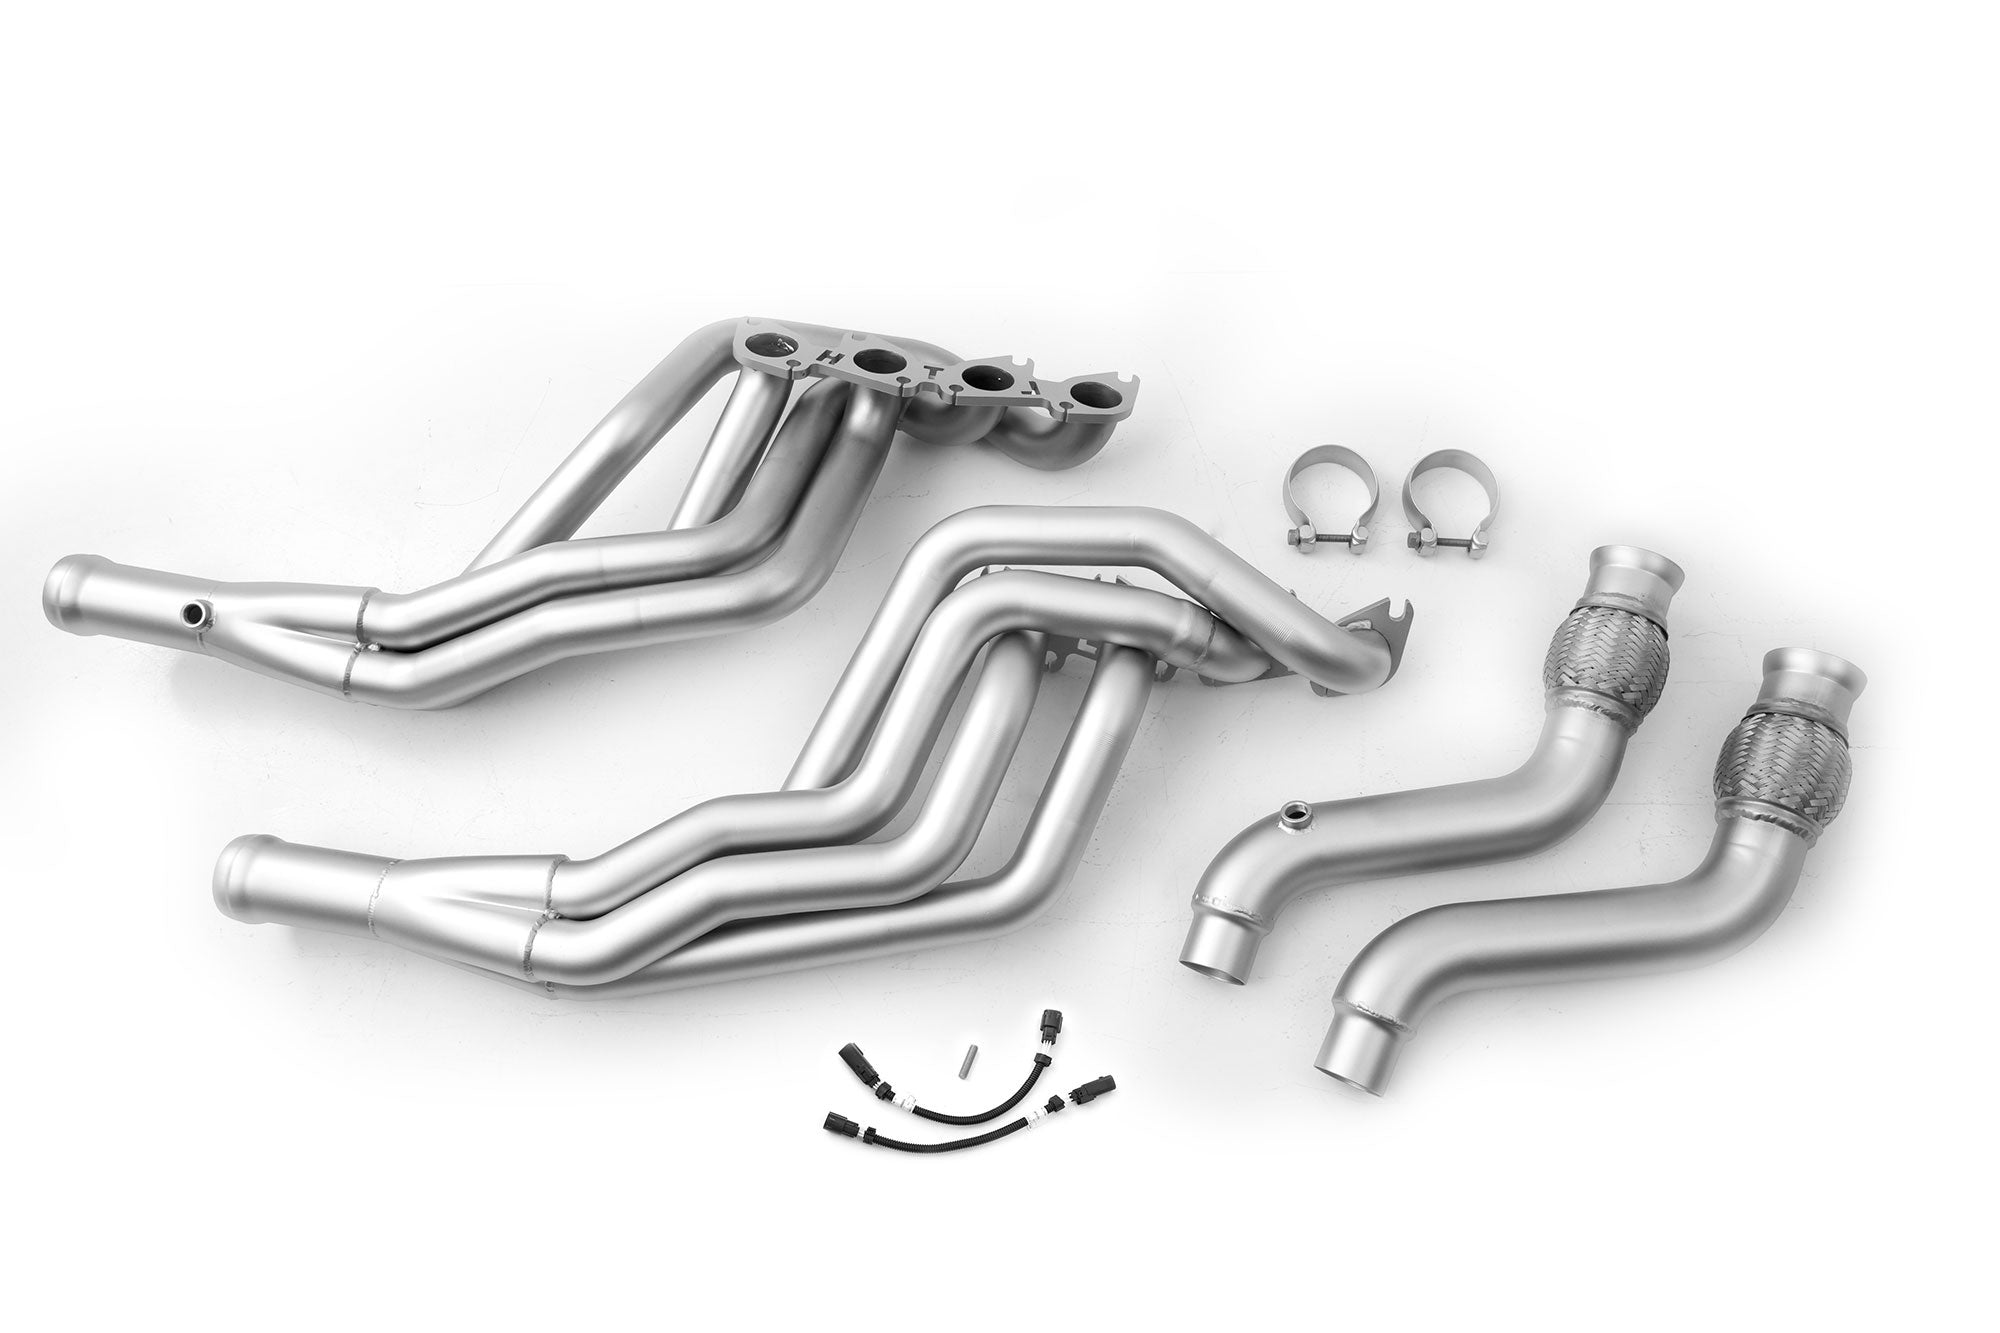 Tubo lungo Mustang LTH S550 Headers - Gatto / Decat (2015-23)